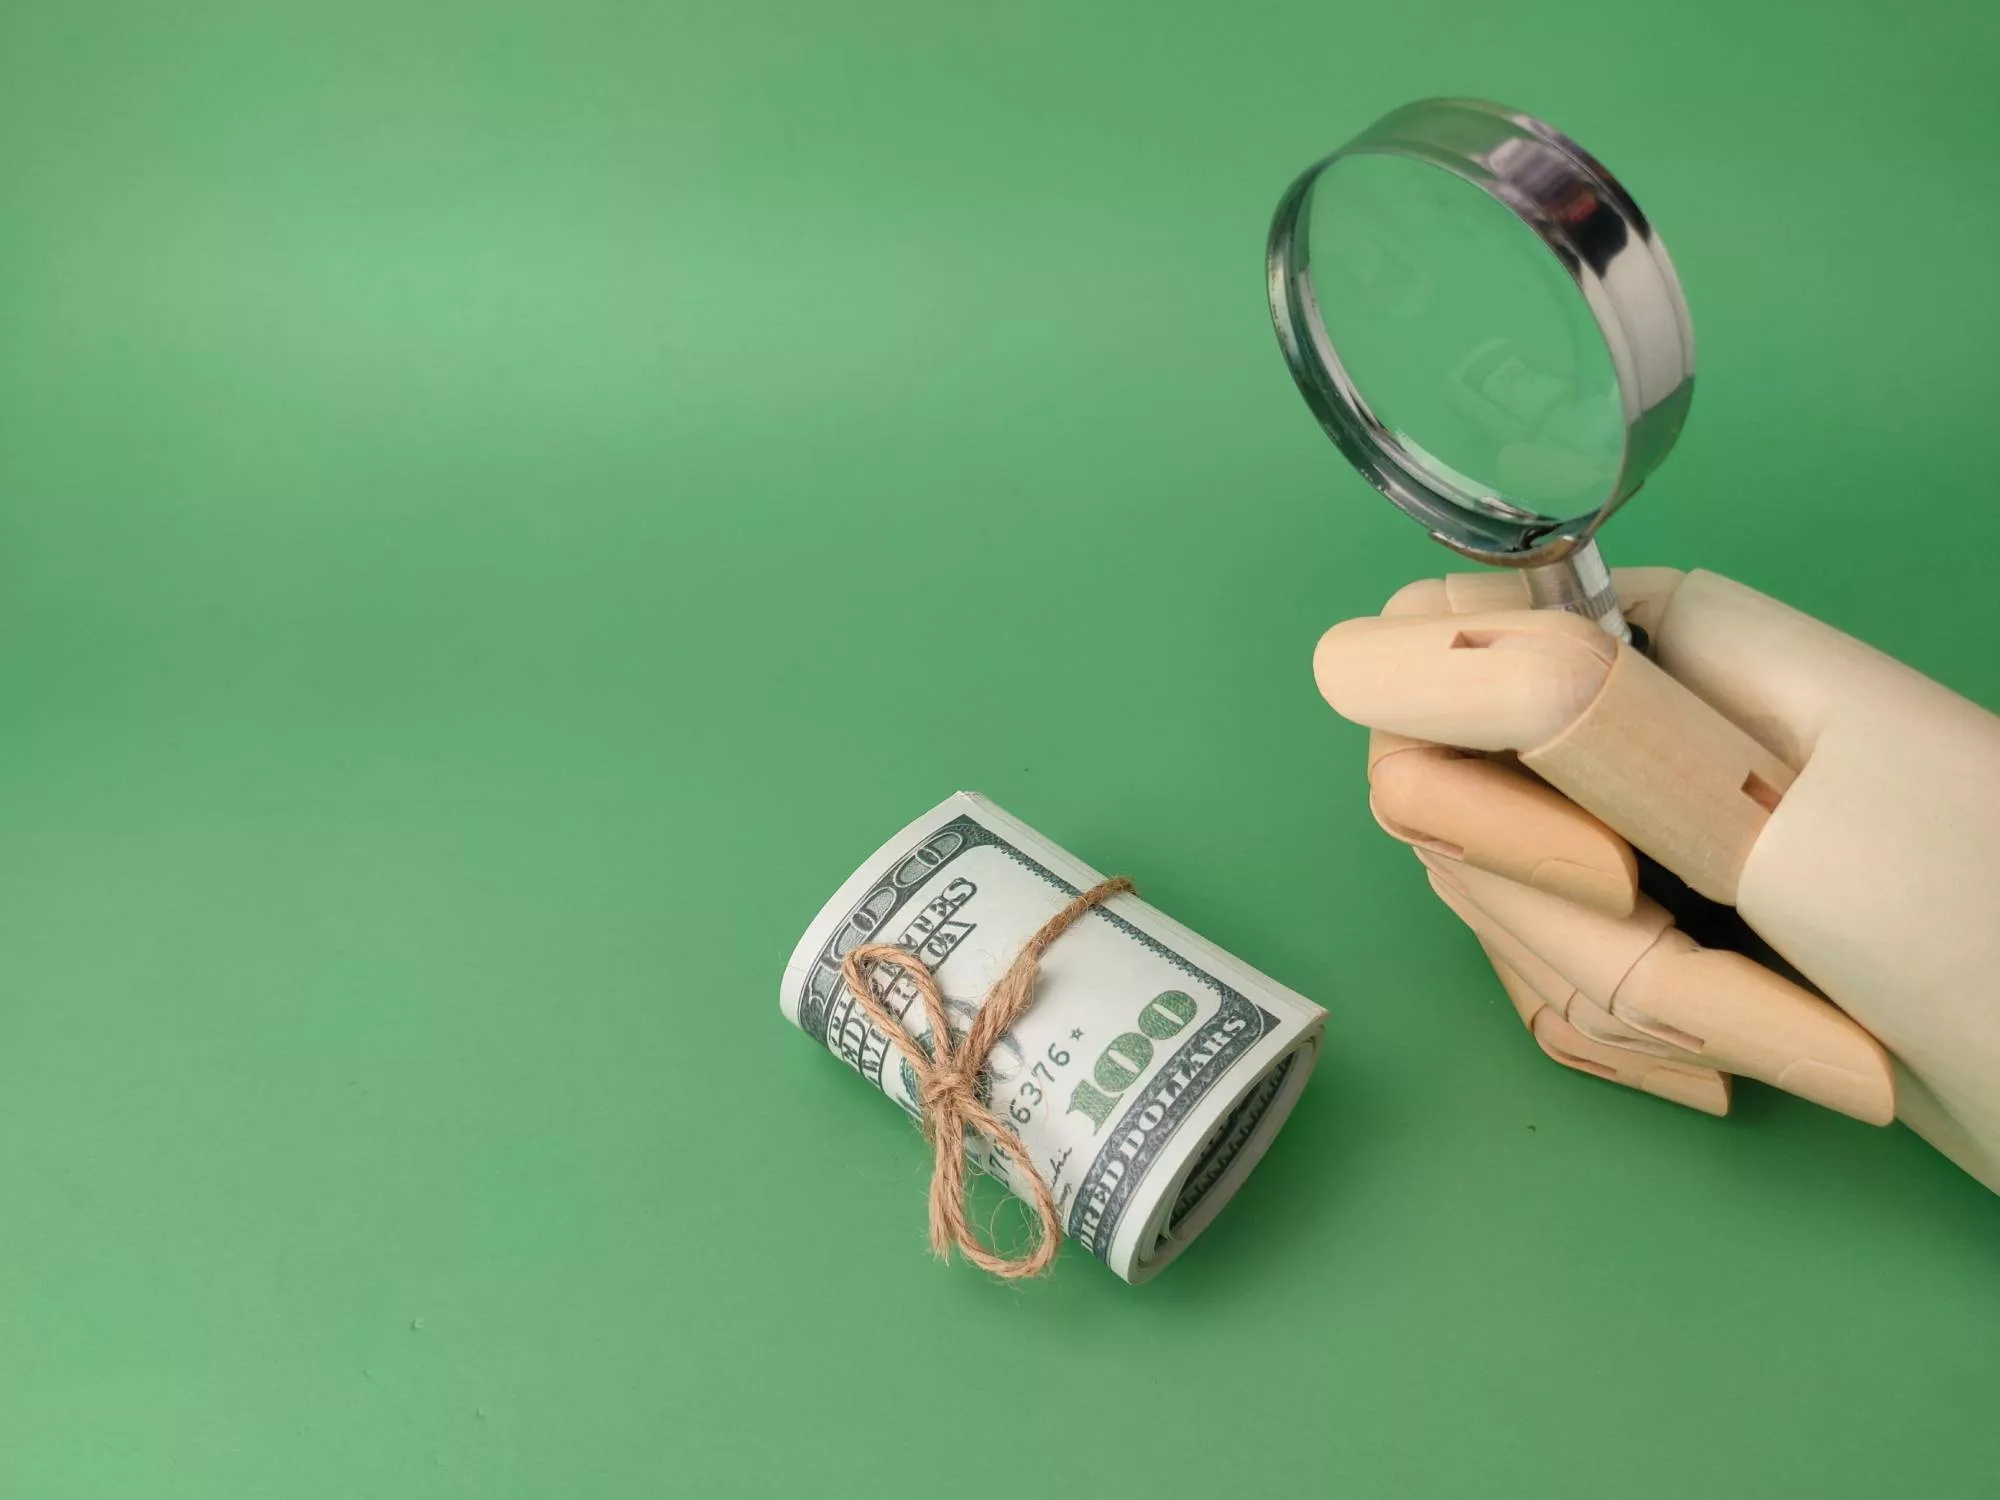 An r63 return code appearing so a wooden hand uses magnifying glass to look at ACH transaction funds on green background